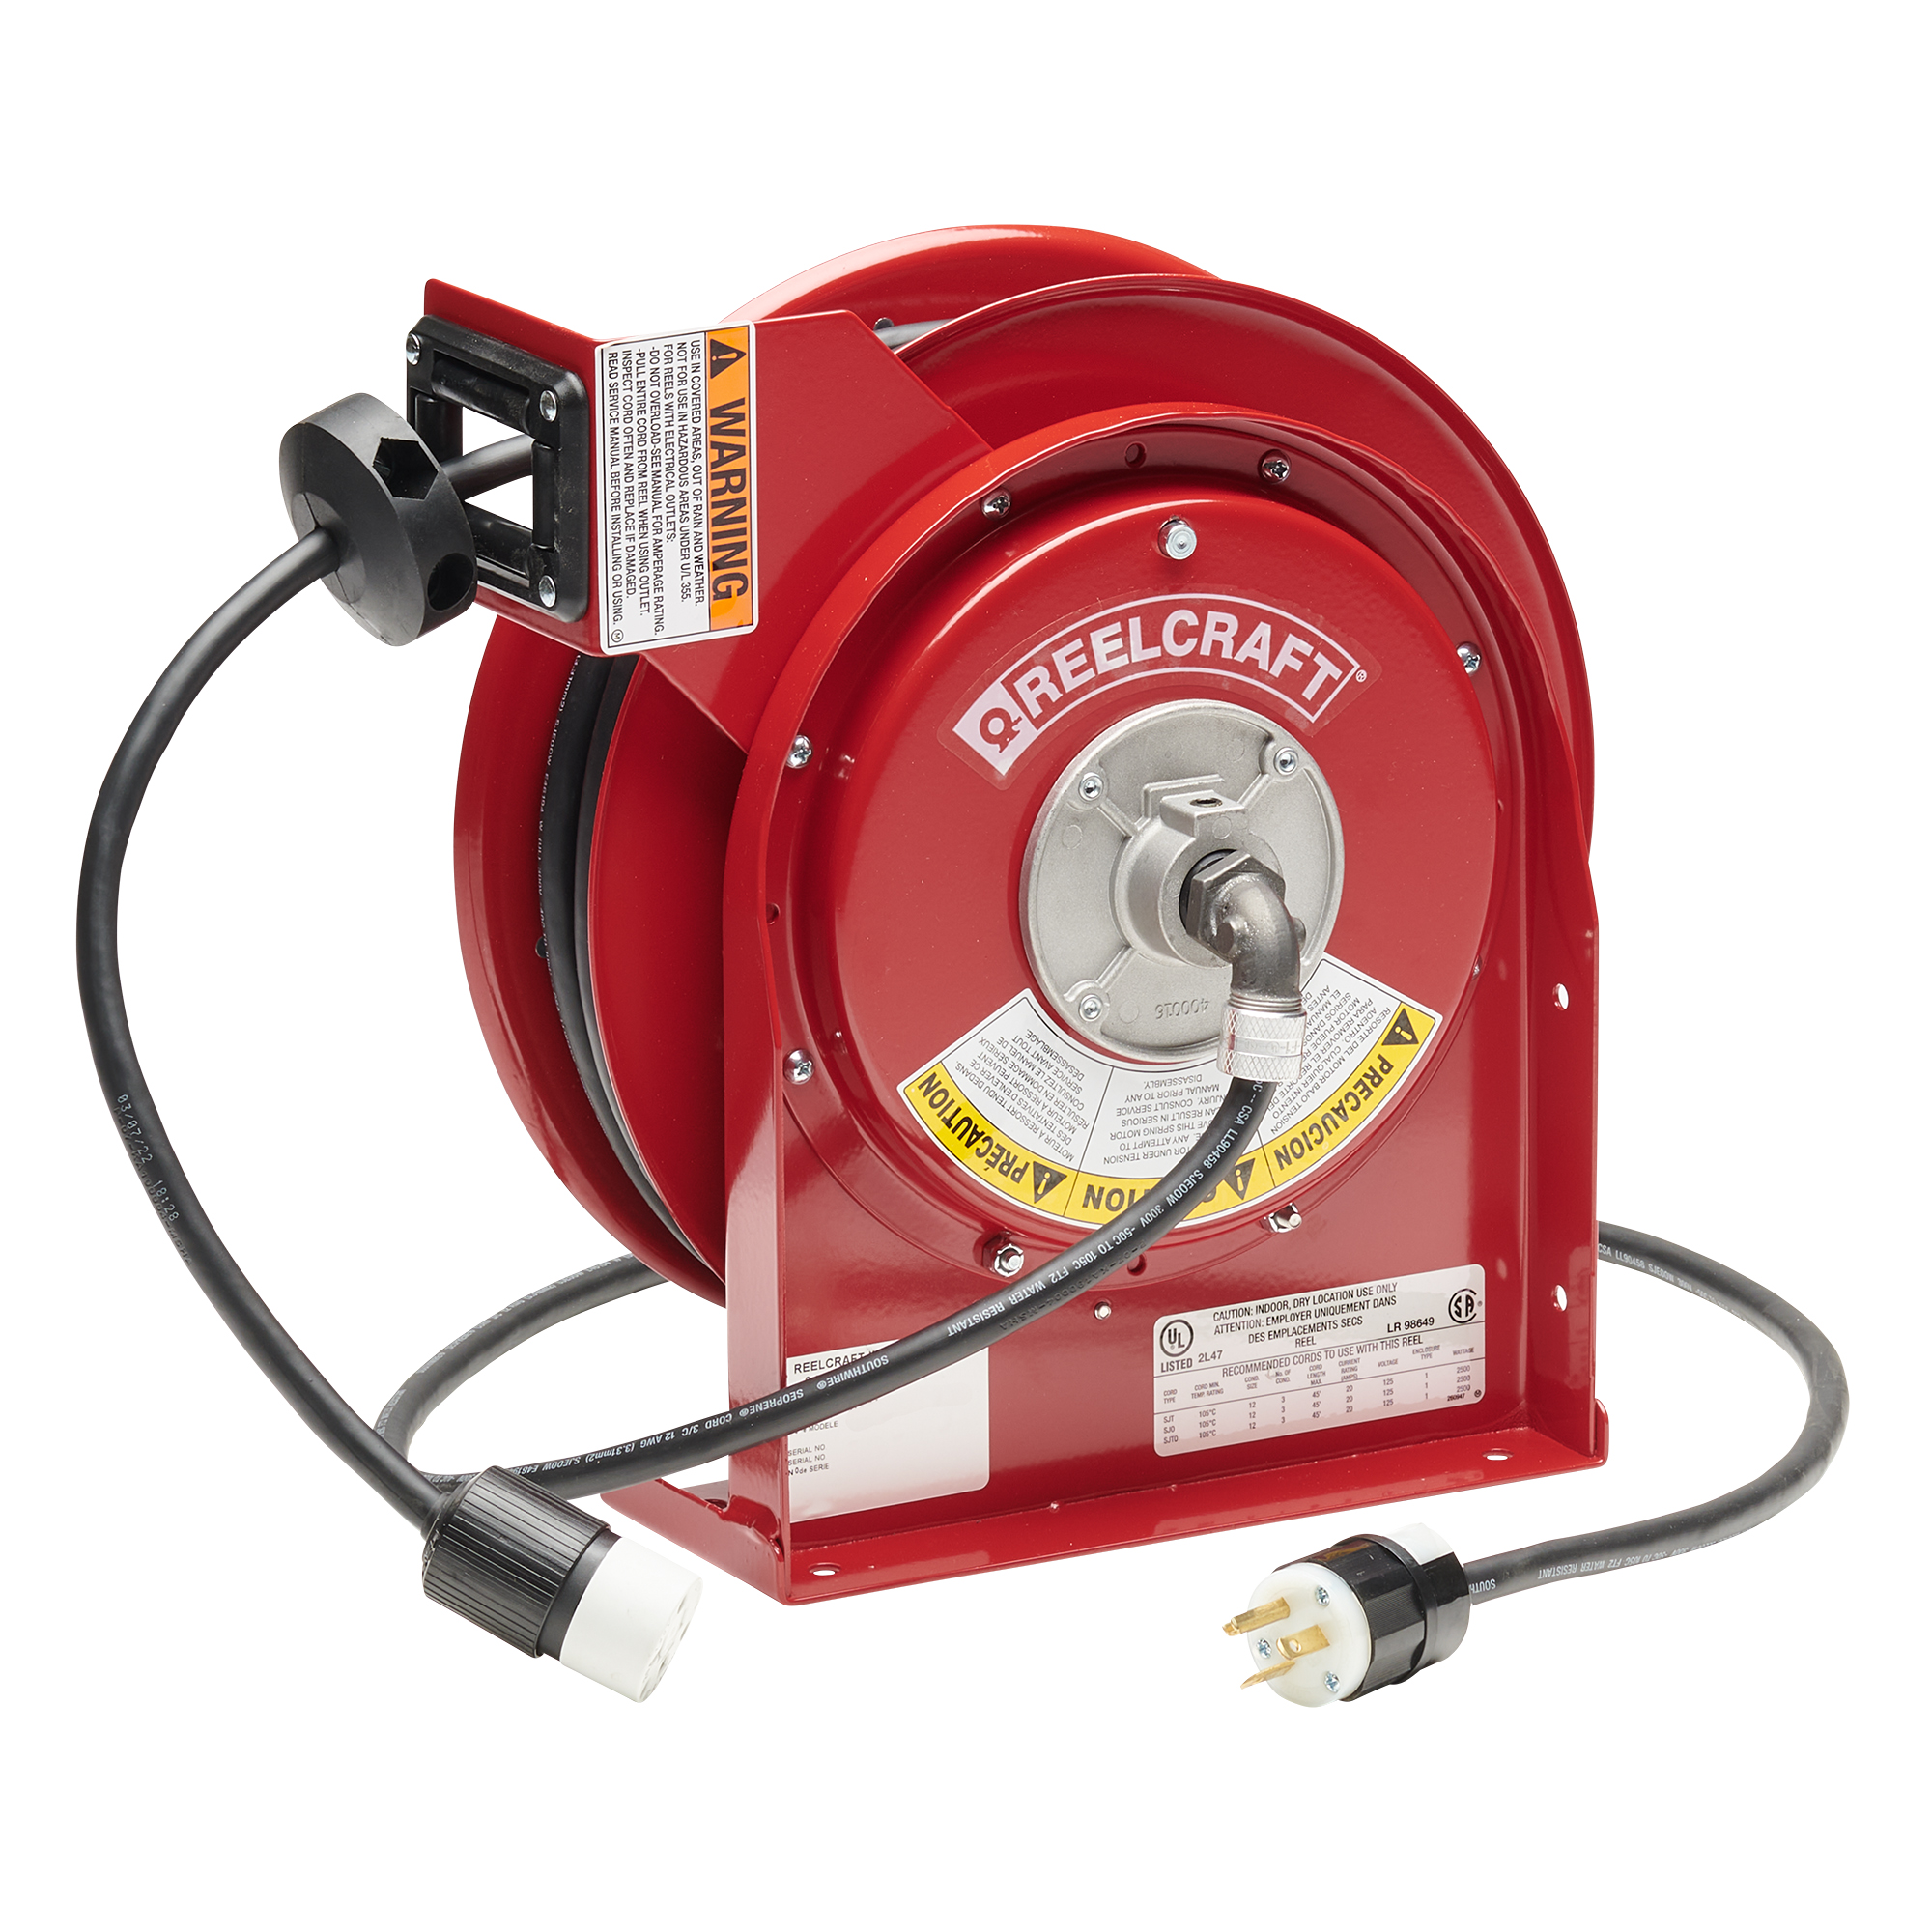 Reelcraft L 4545 123 3A - 12/3 45 ft. Premium Duty Single Receptacle Power Cord  Reel